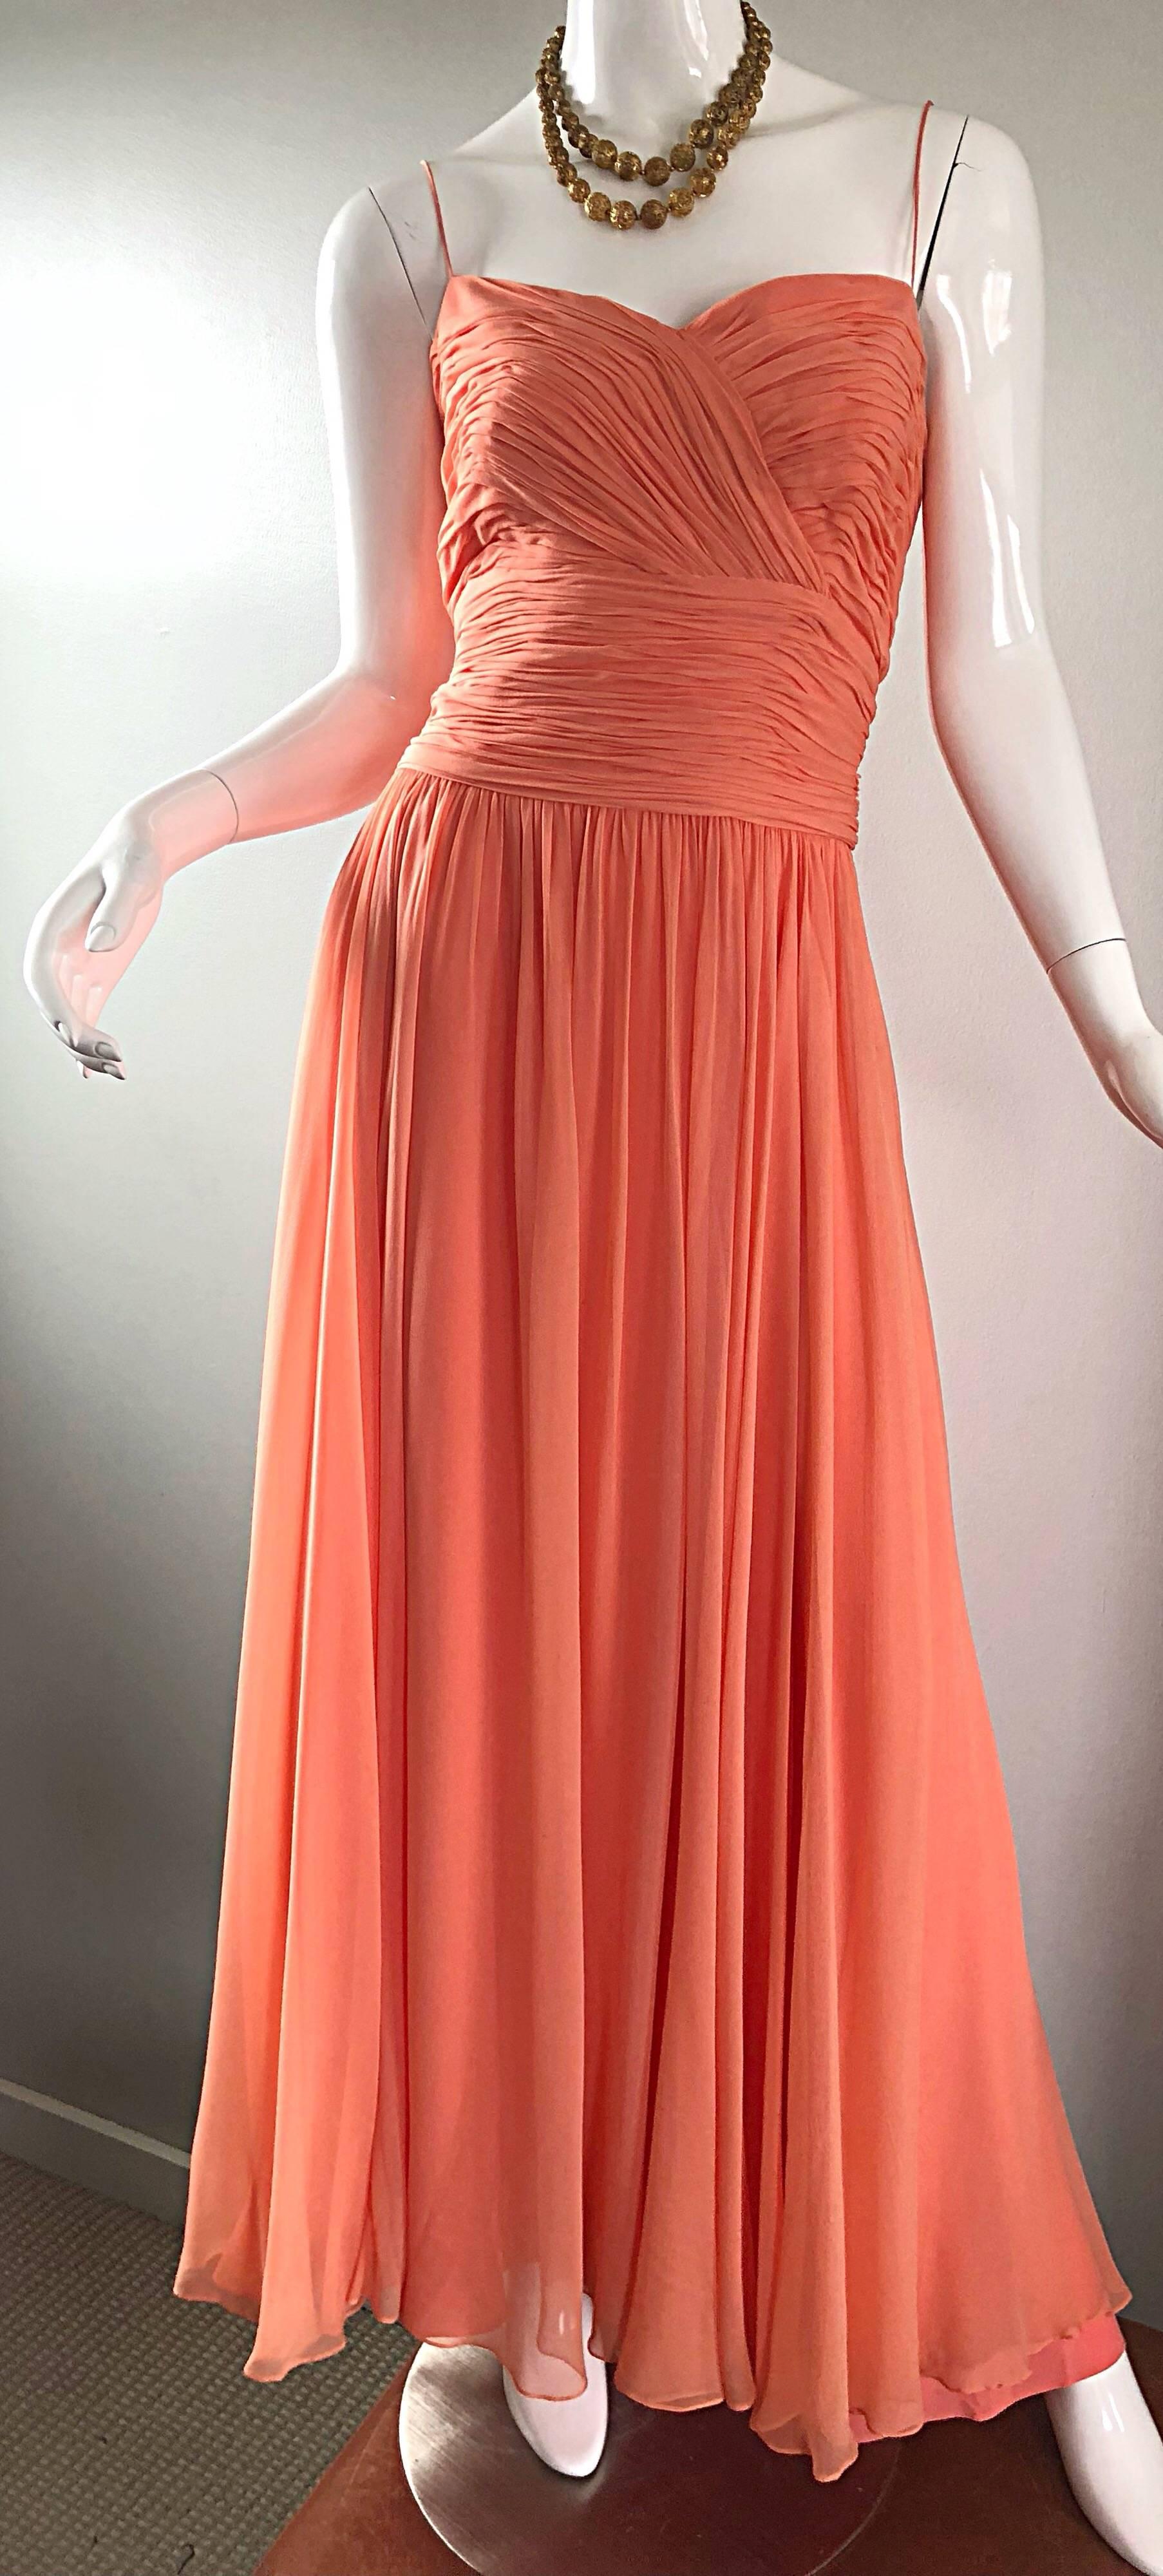 Gorgeous 1950s Saks 5th Ave. Salmon / Coral Pink Silk Chiffon Vintage 50s Gown 6